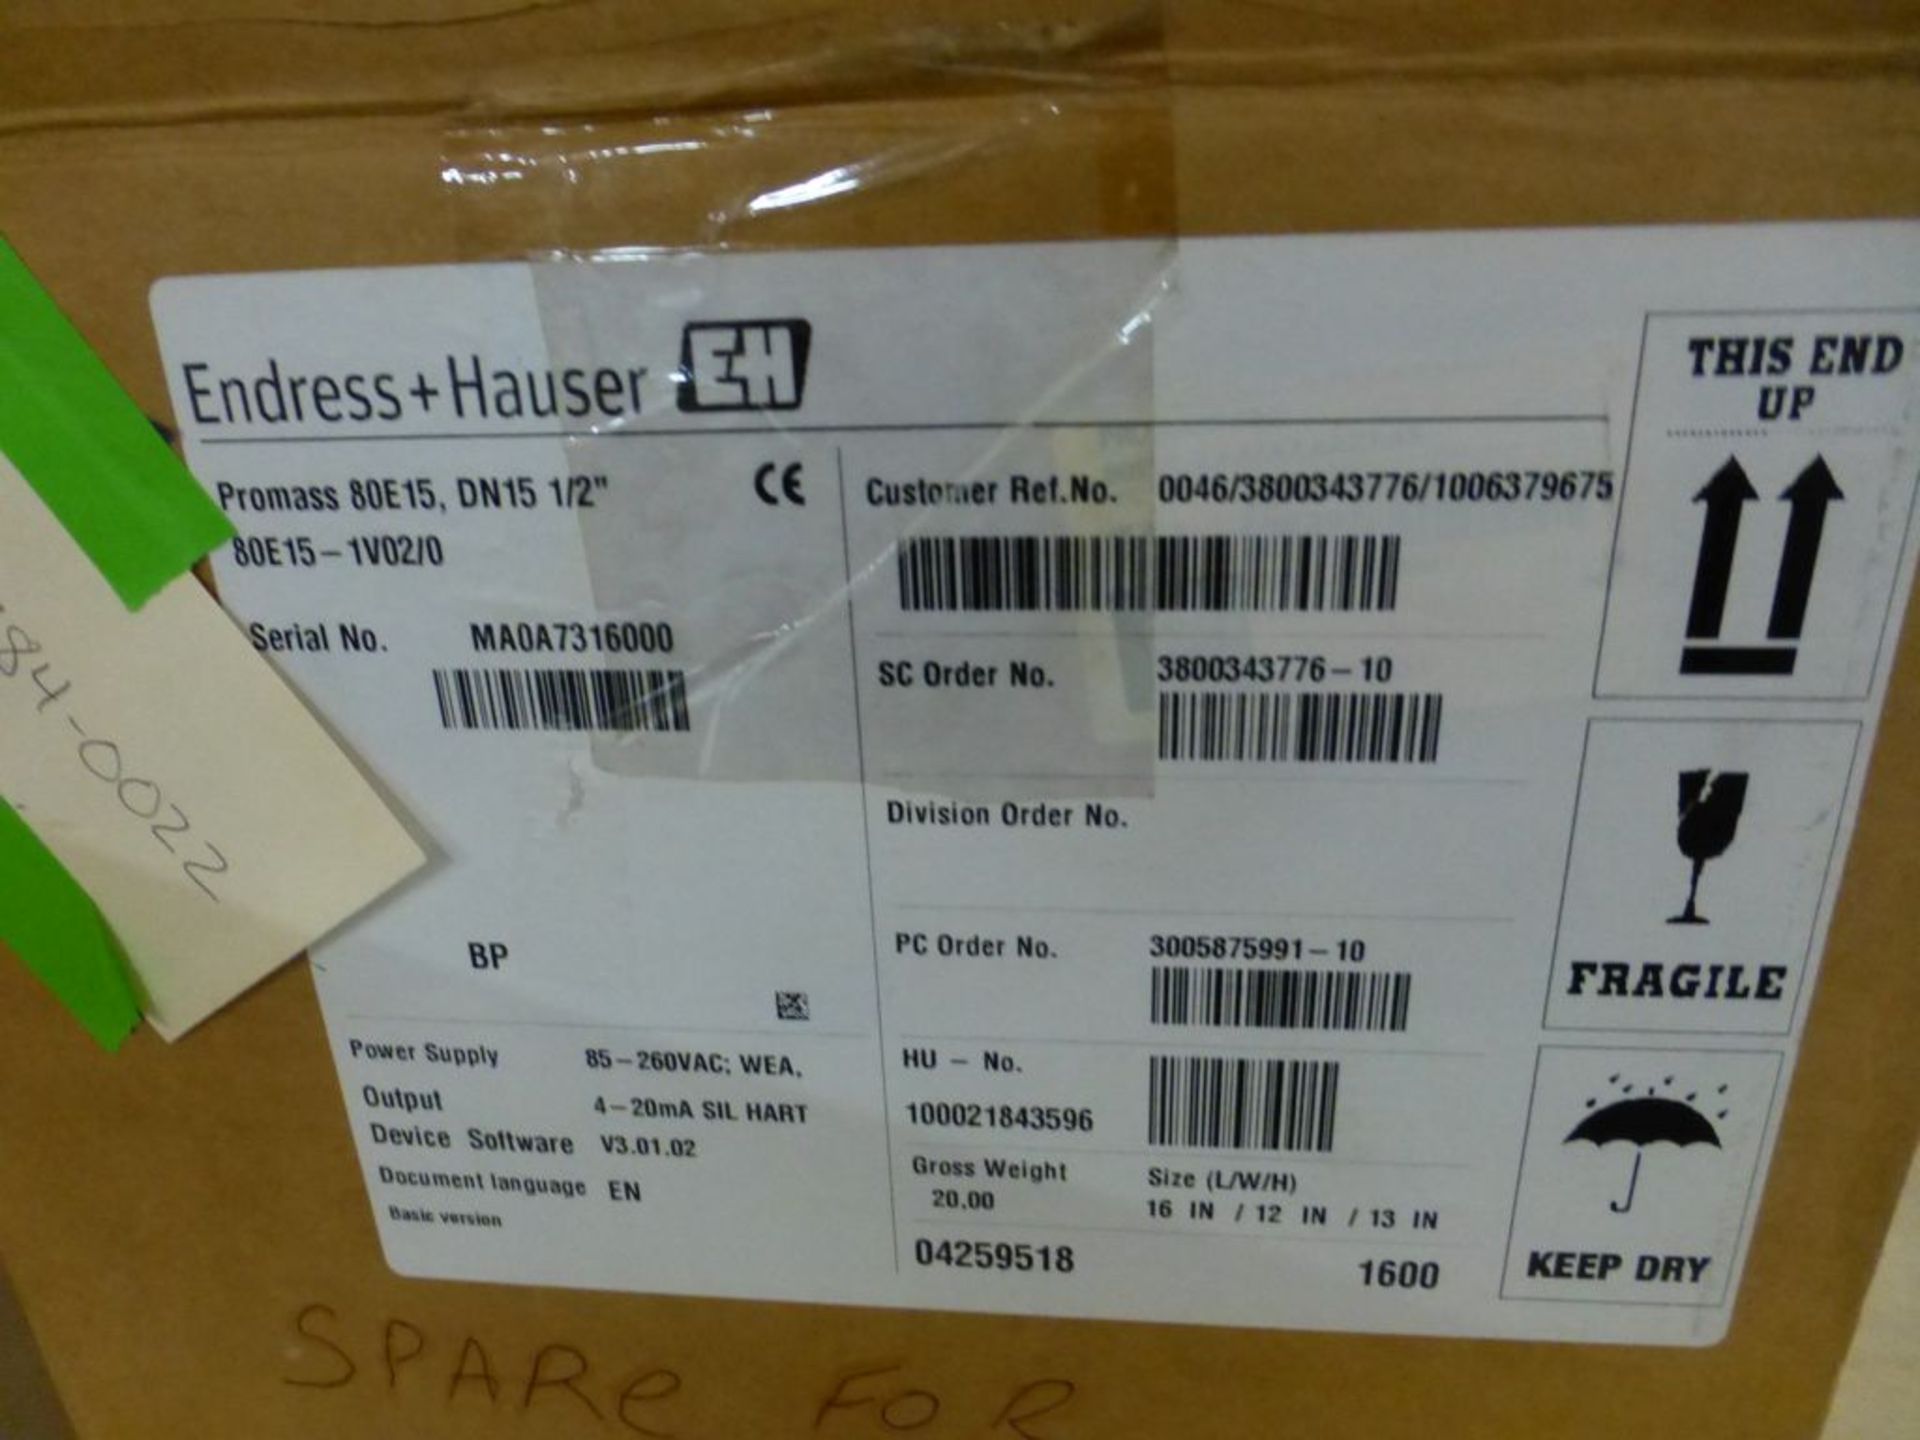 Endress Hauser Promass - Model No. 80E15-1102/0; 85-260 VAC; New Surplus; Tag: 221992 - Image 3 of 6